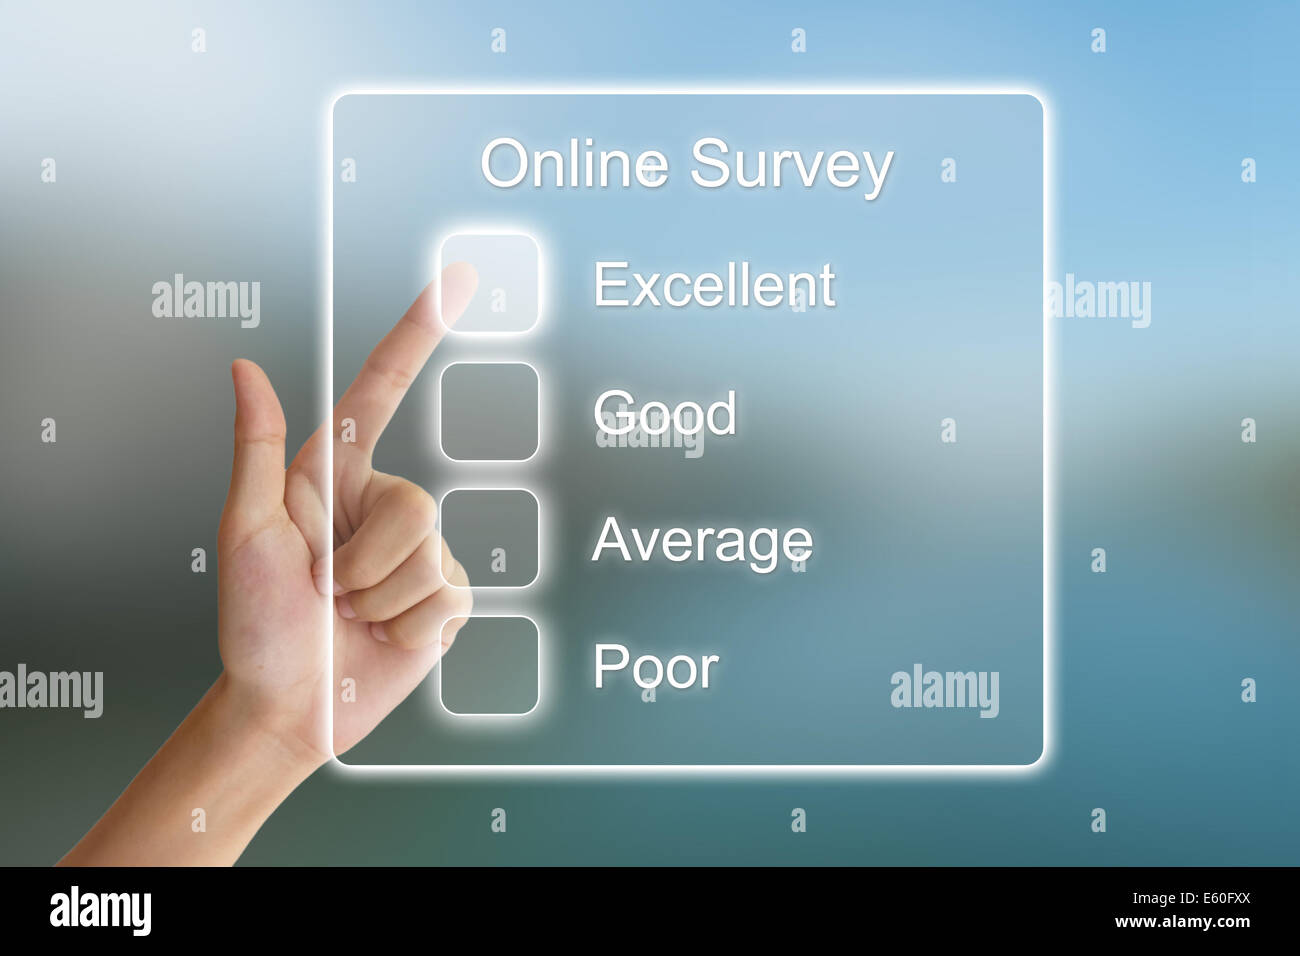 hand clicking online survey on virtual screen interface Stock Photo